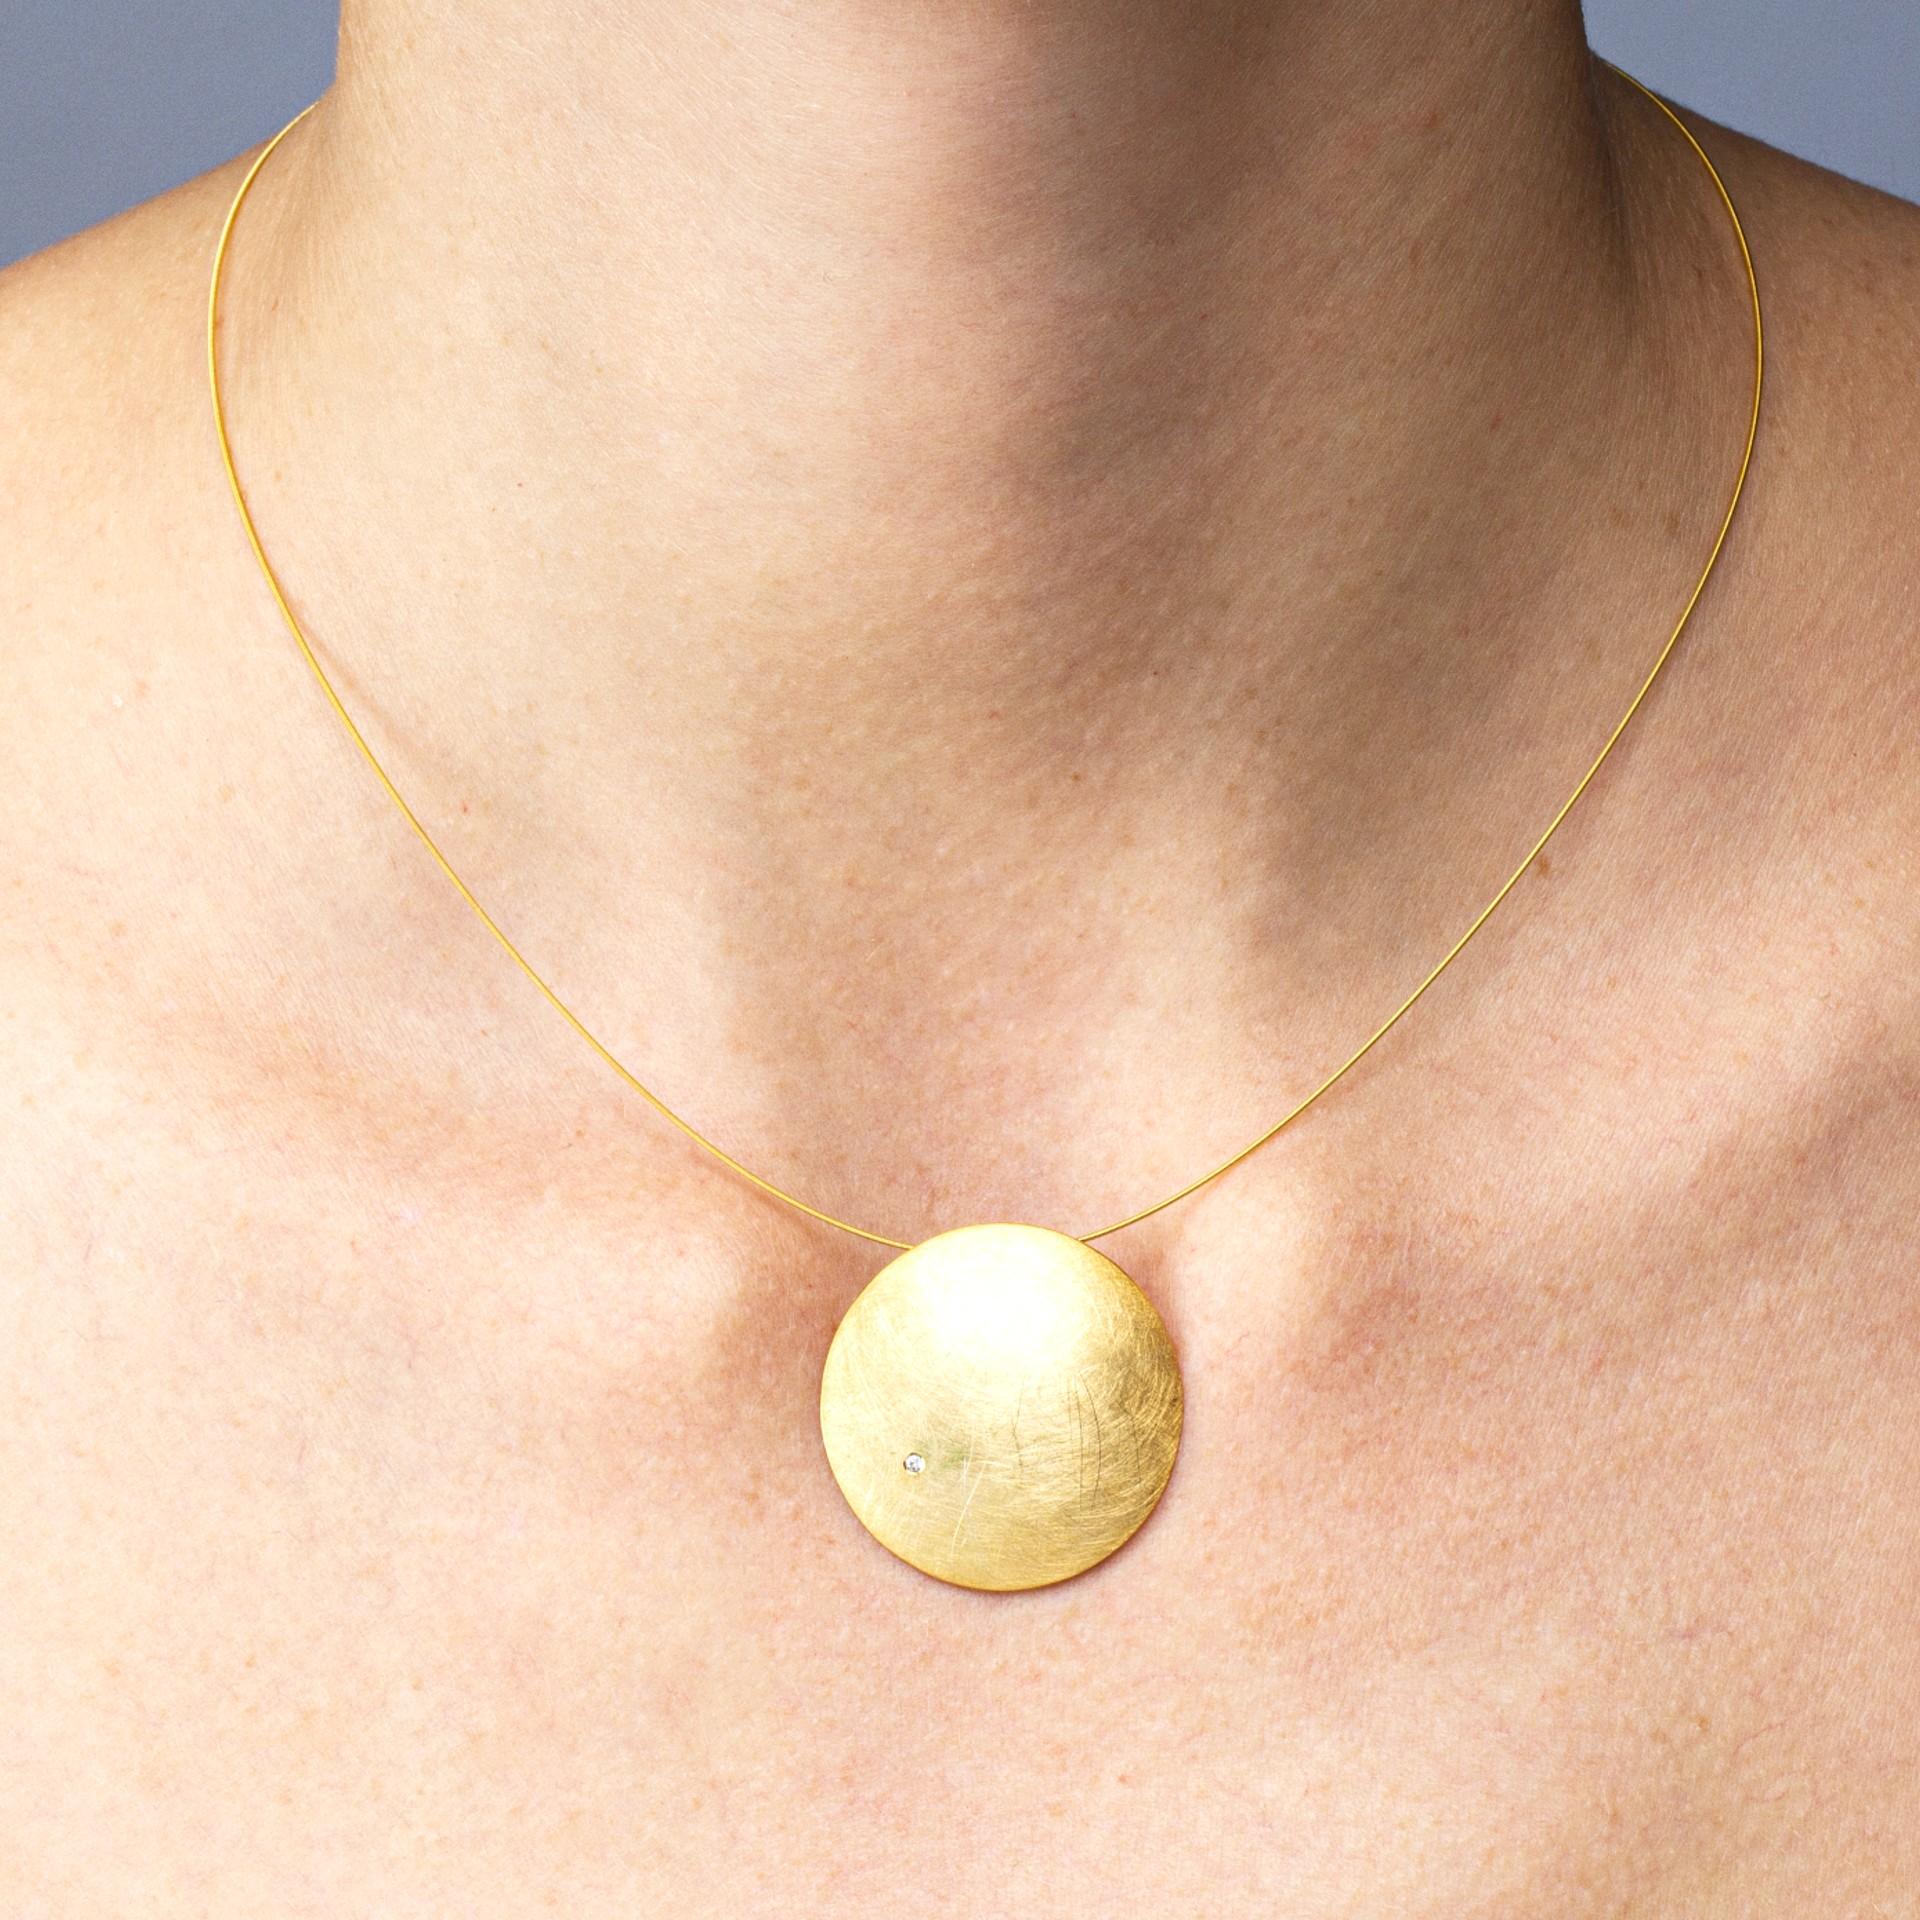 Alex Jona design collection, hand crafted in Italy, gold plated sterling silver choker necklace suspending a disk pendant.

Alex Jona jewels stand out, not only for their special design and for the excellent quality of the gemstones, but also for